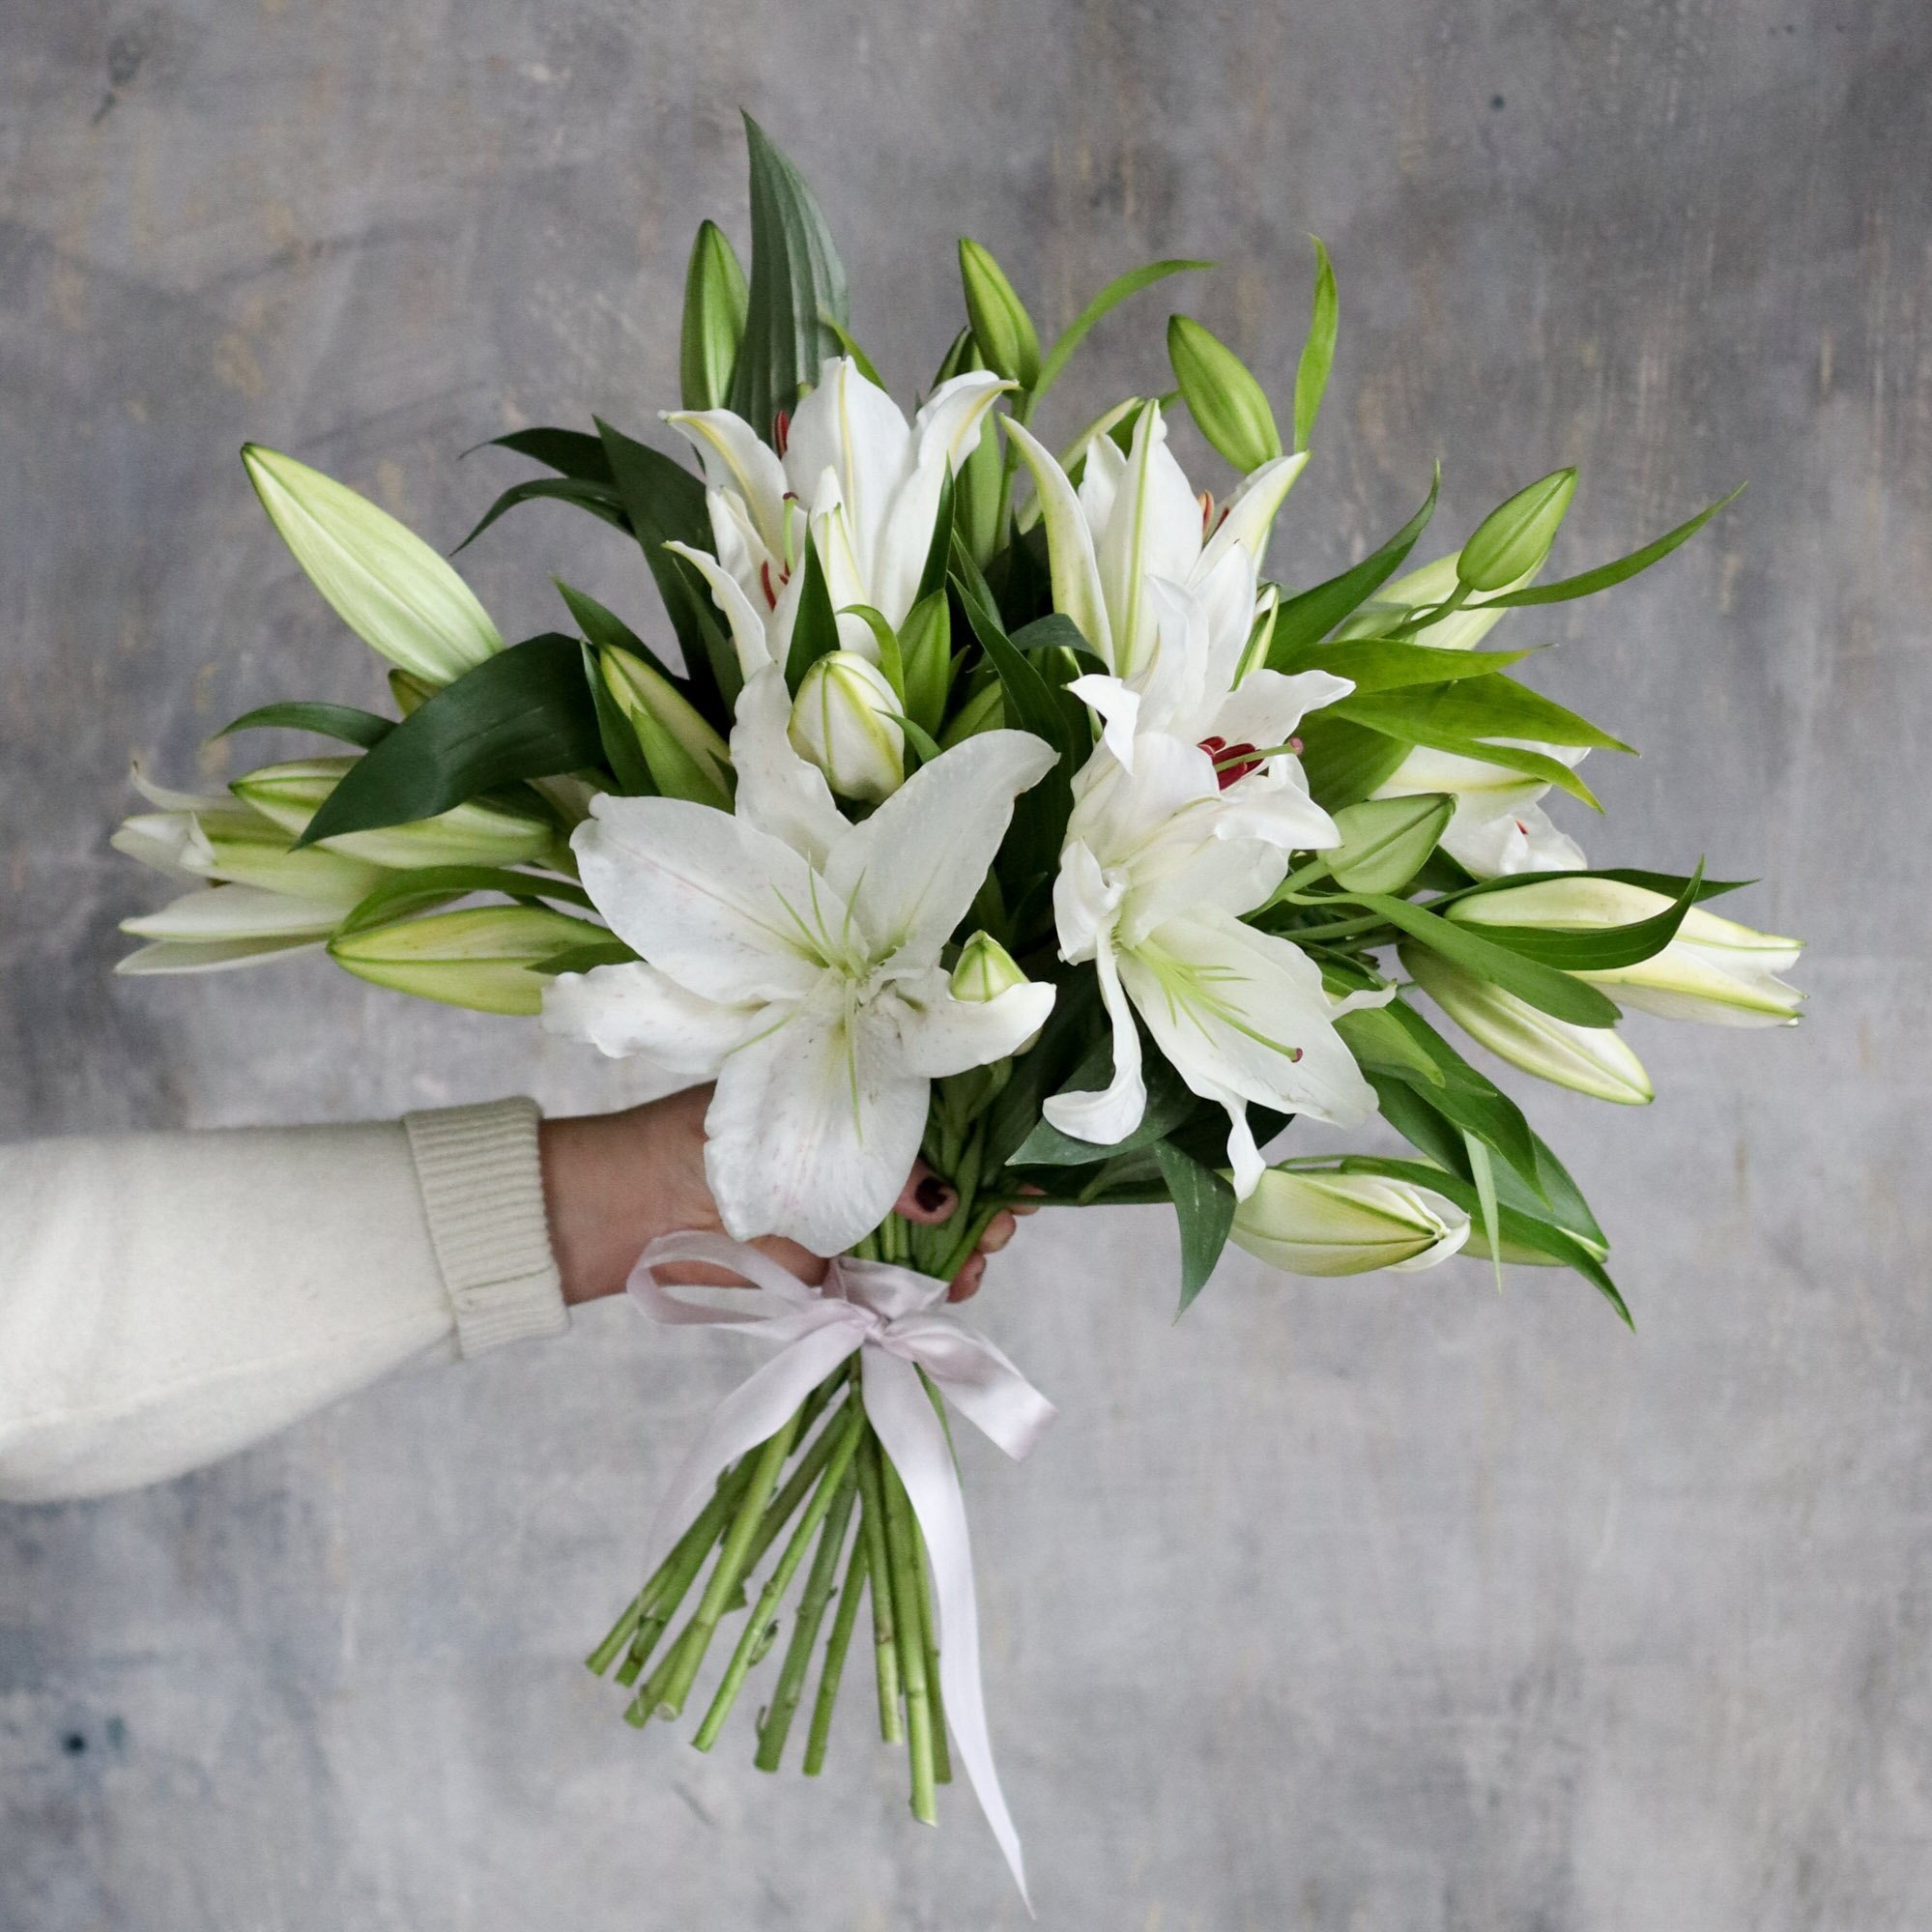 A bouquet of white lilies and greenery tied with a white bow, held up in front of a gray background